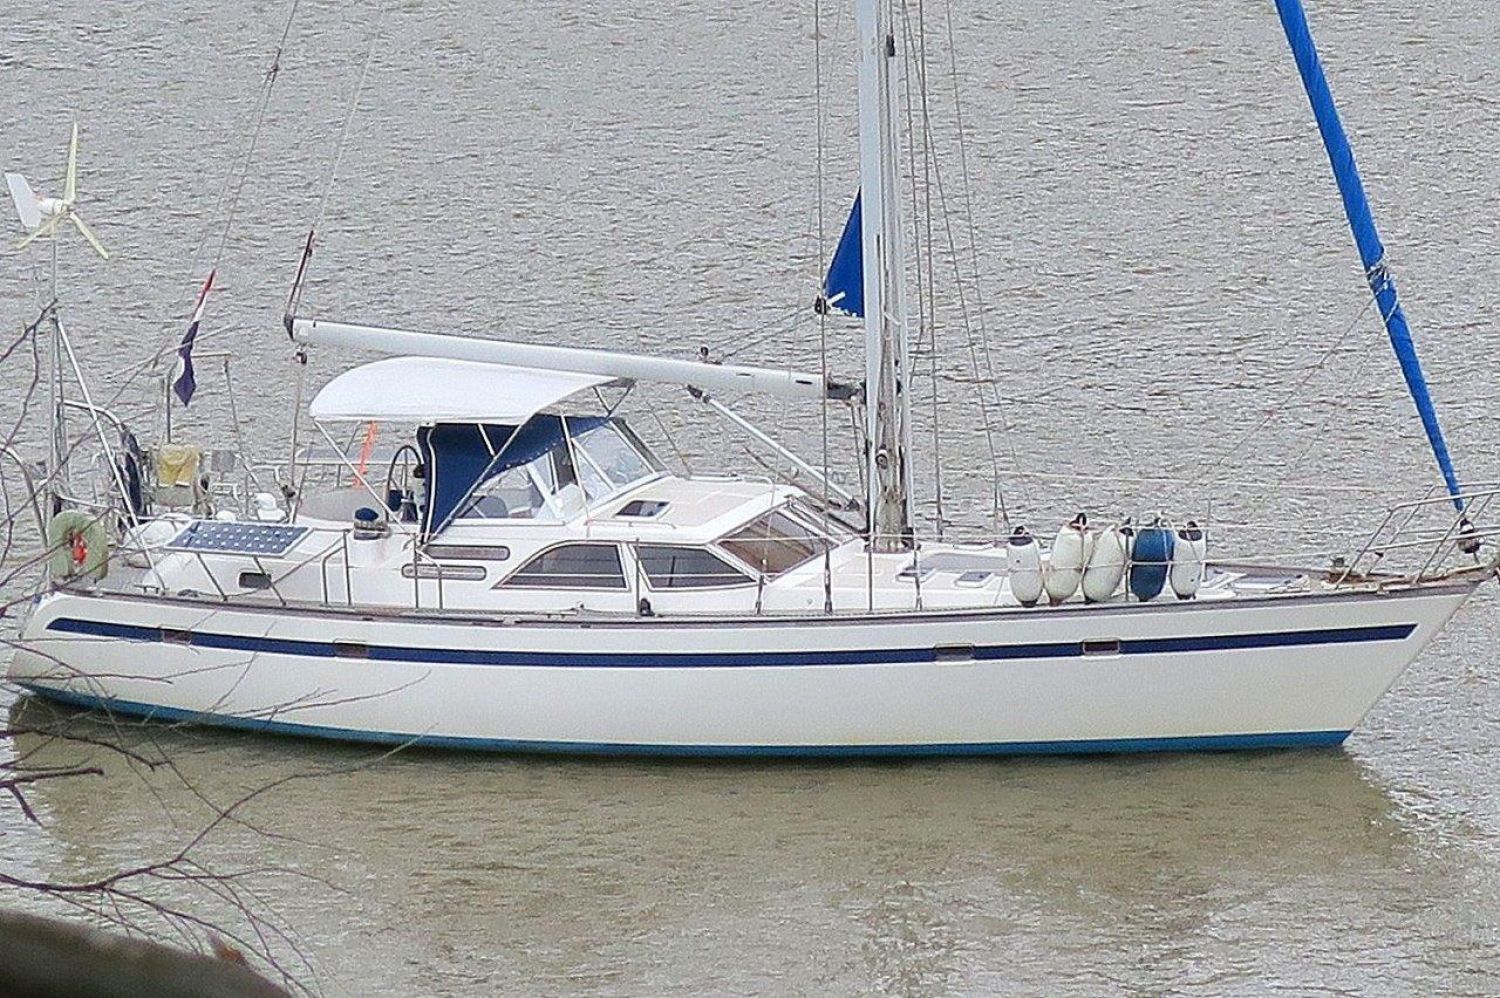 taswell sailboat for sale